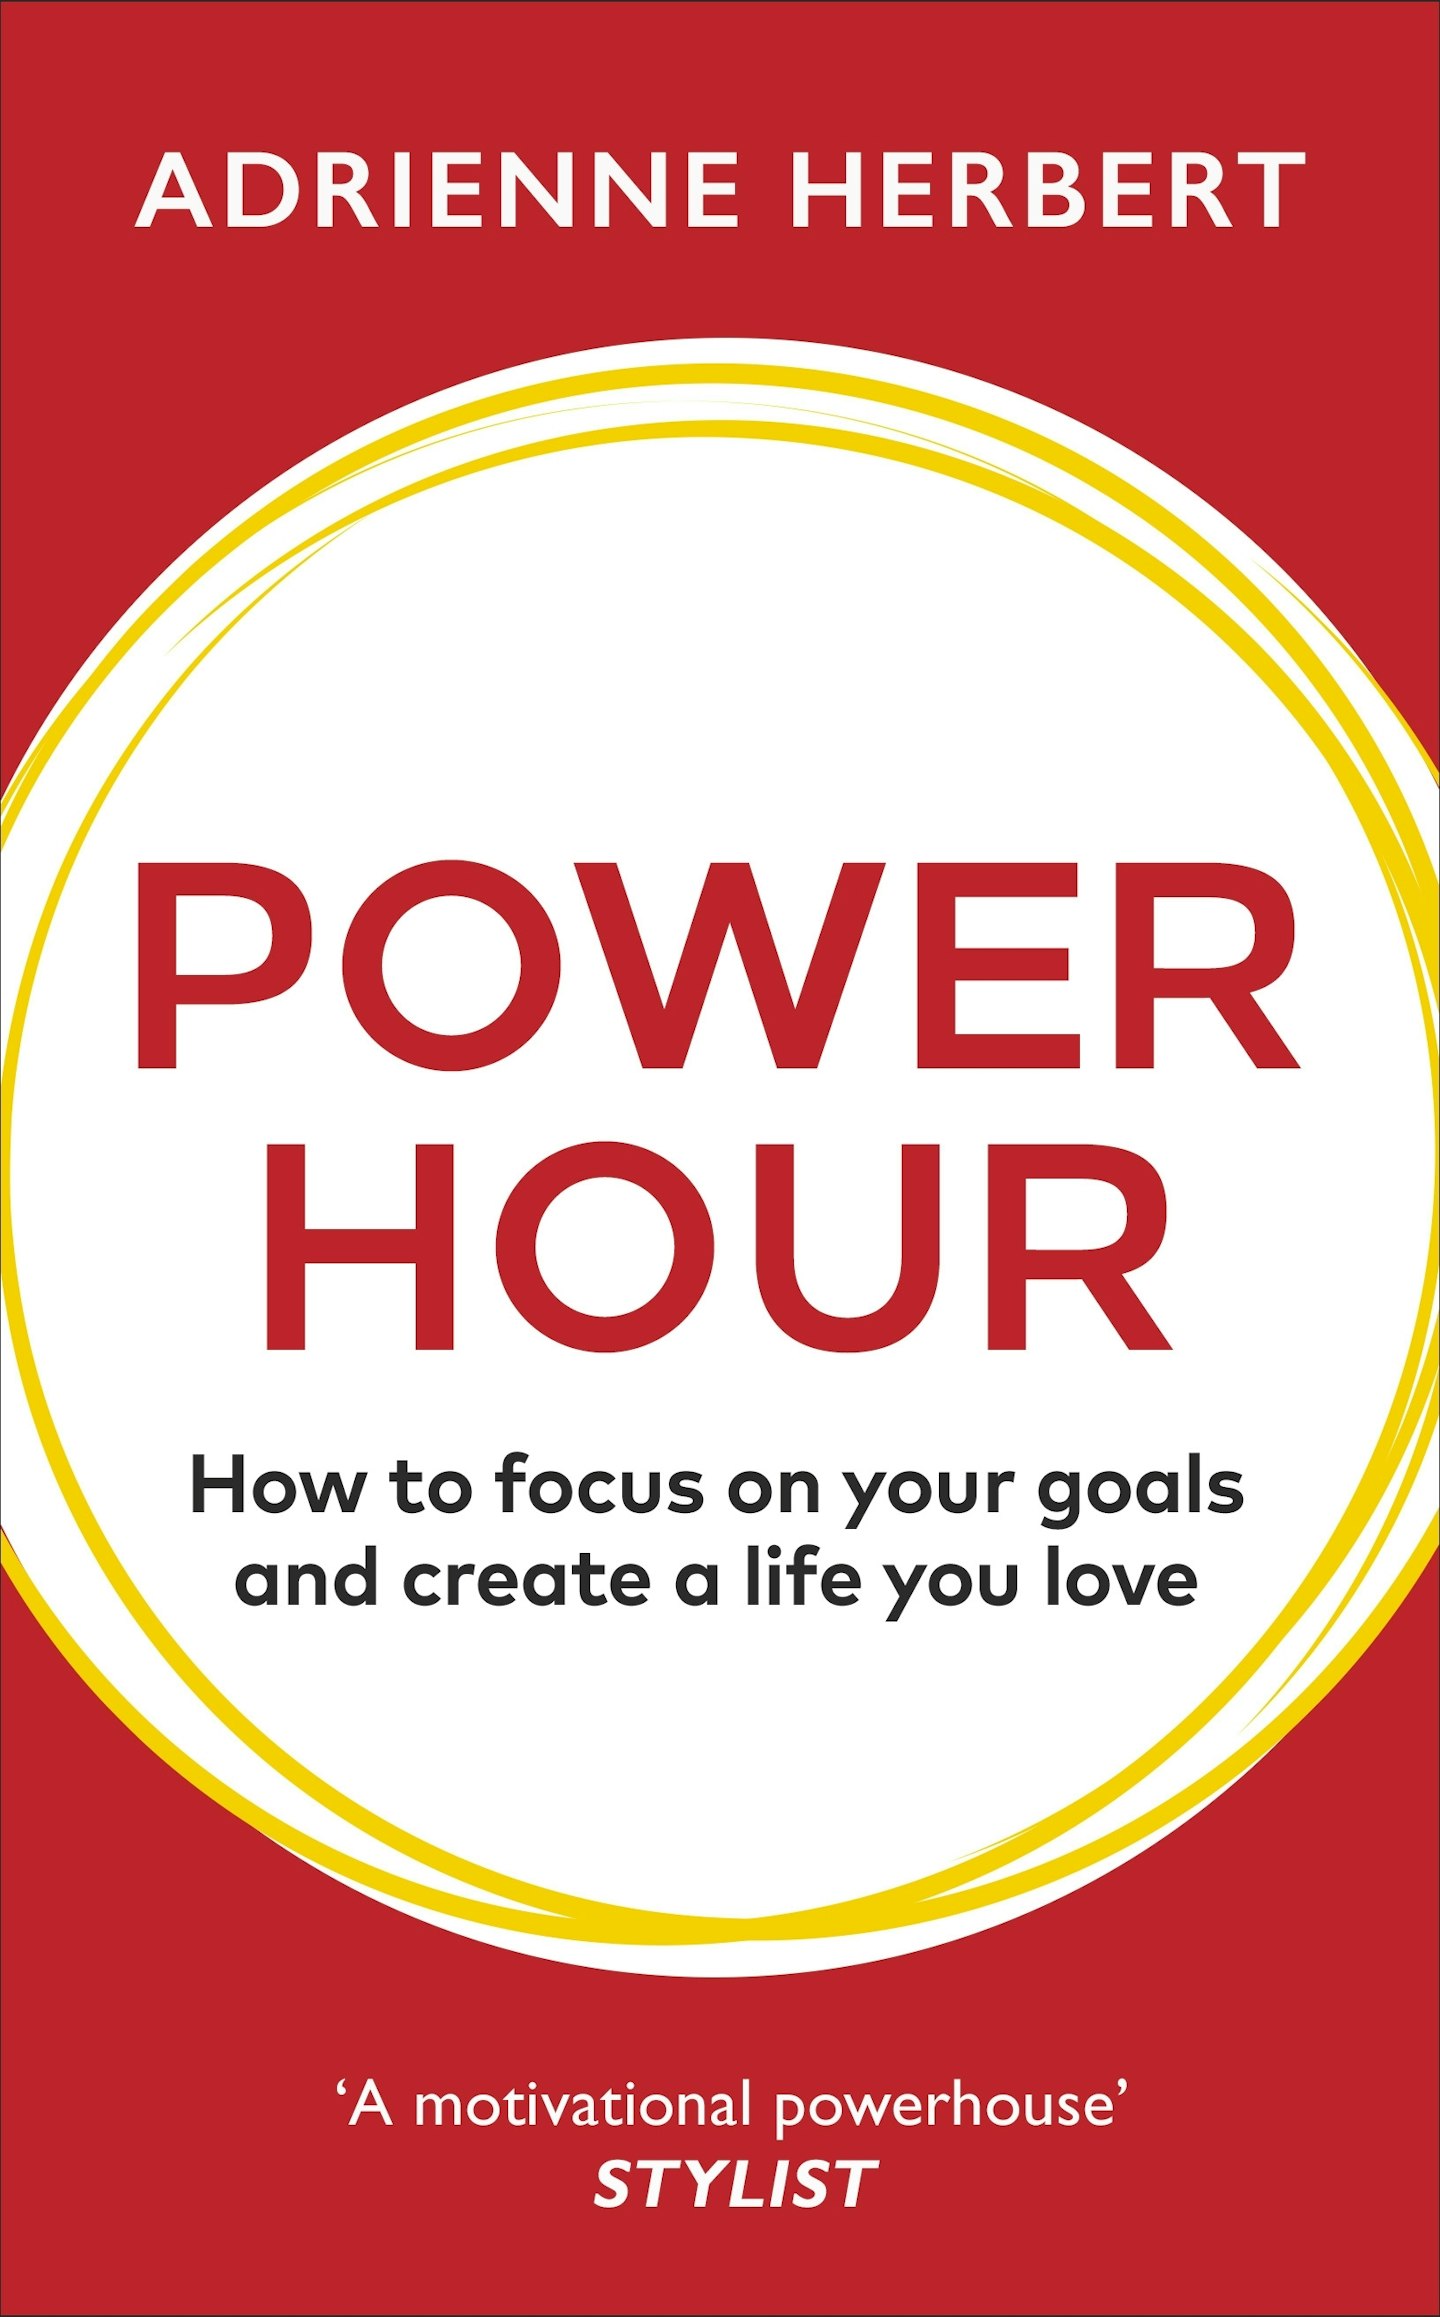 best self help books Power Hour: How to Focus on Your Goals and Create a Life You Love, by Adrienne Herbert